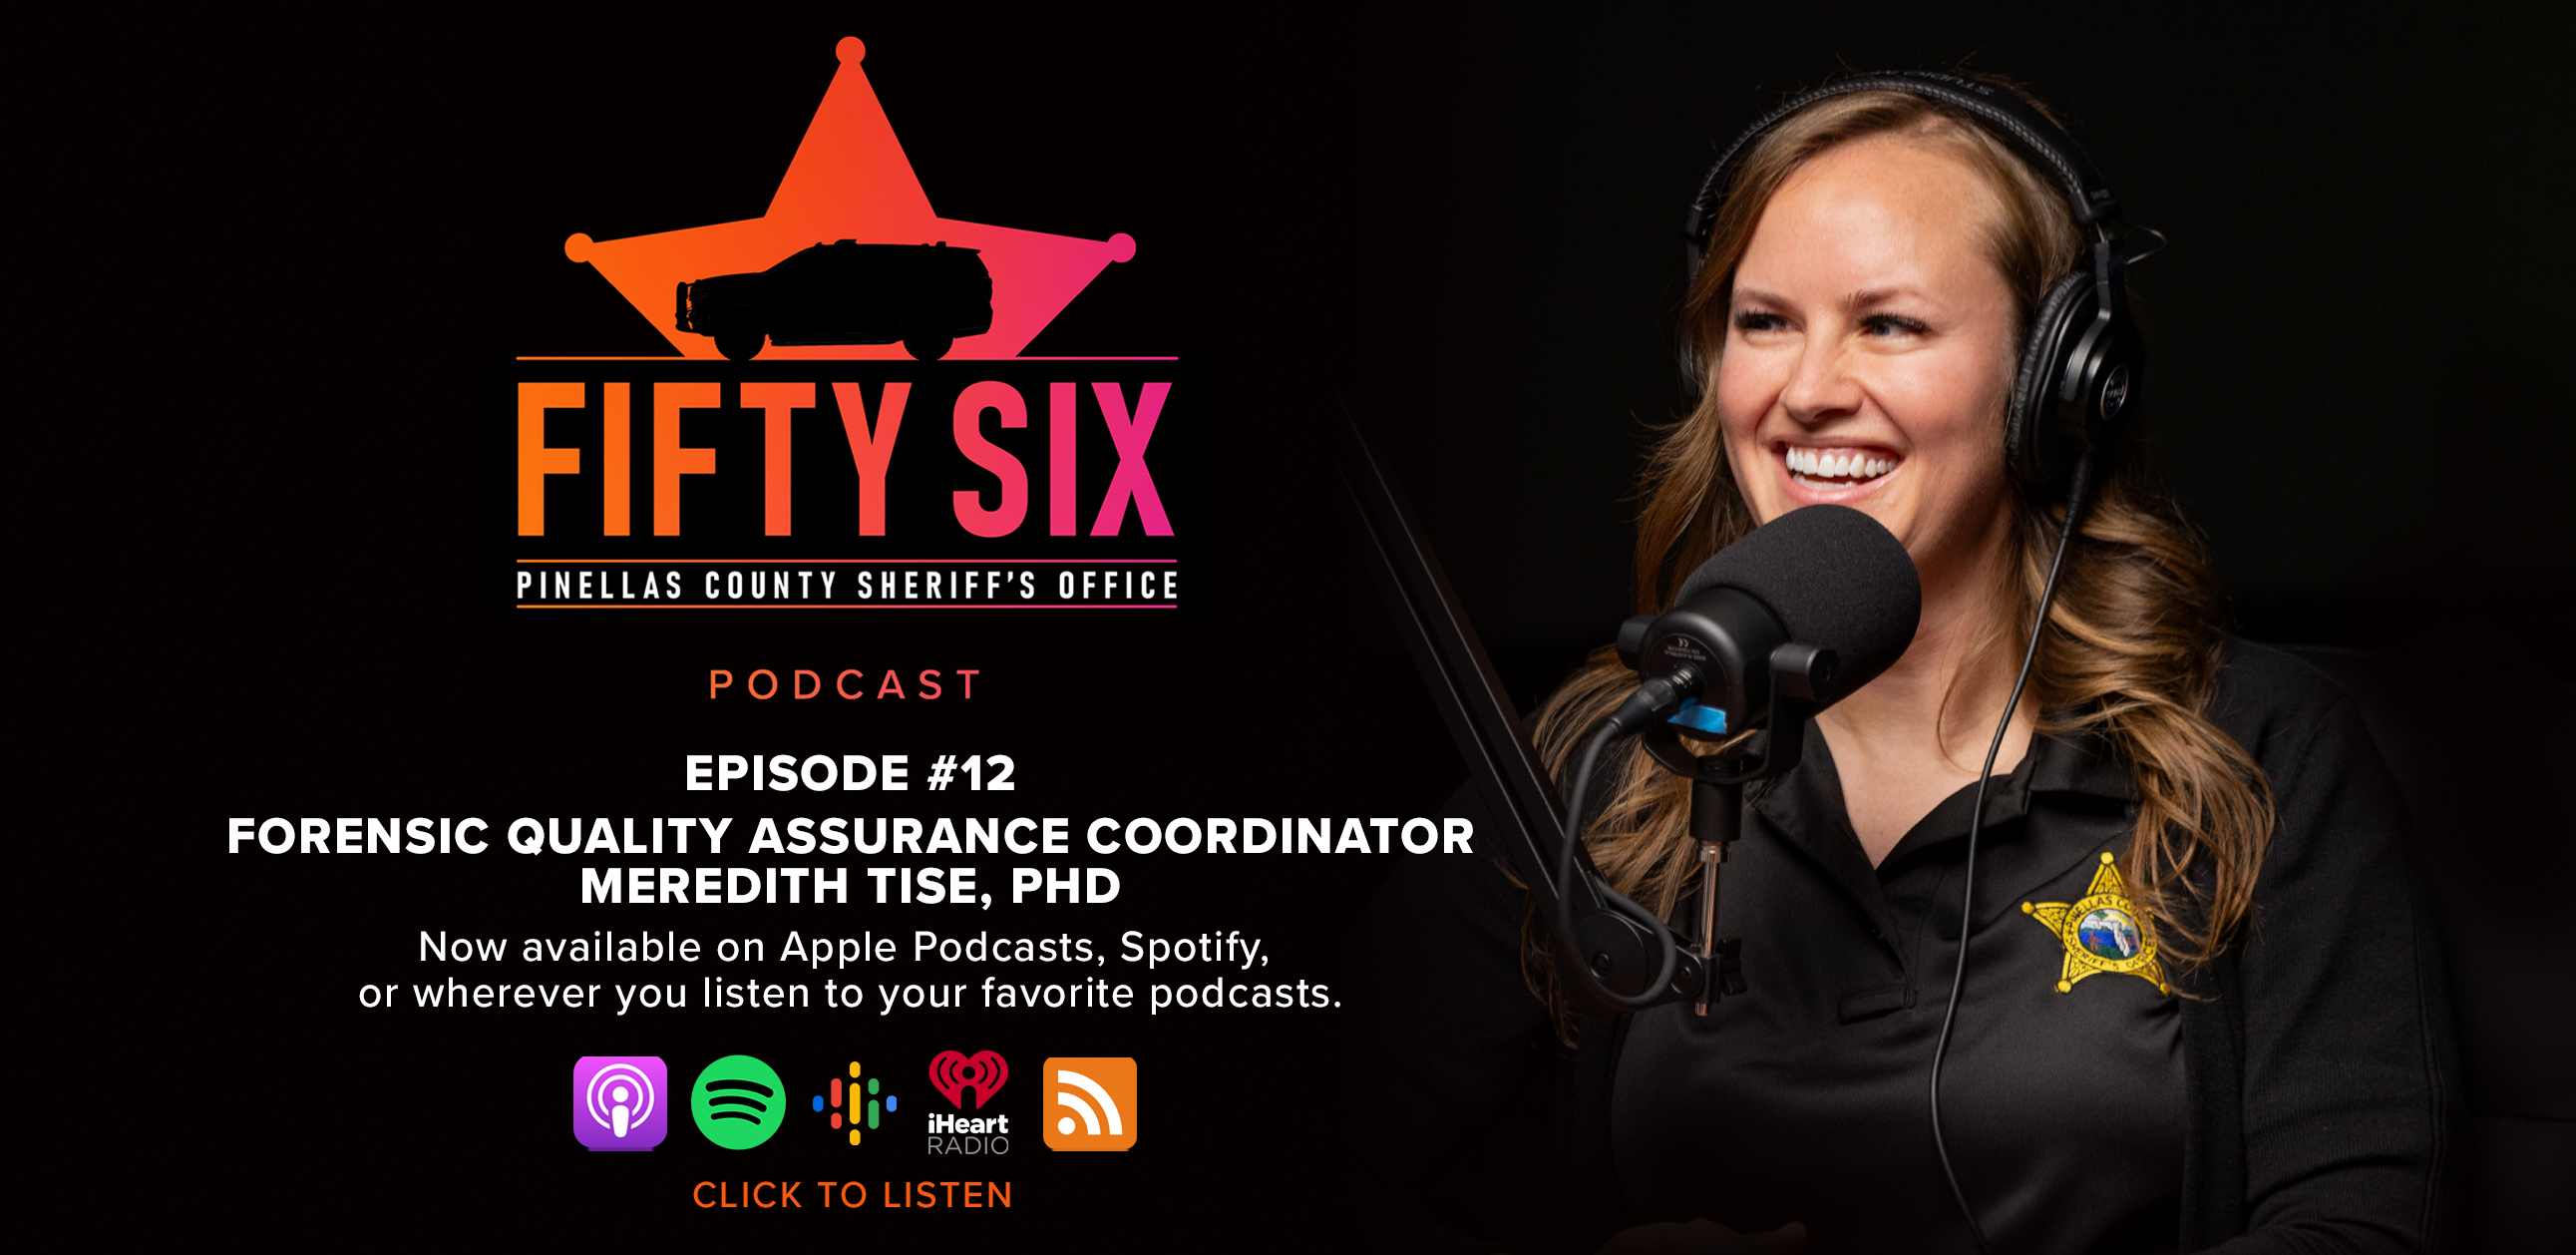 56 Podcast, Episode 12 Forensic Quality Assurance Coordinator Meredith Tise,PHD , now available wherever you listen to your favorite podcasts.